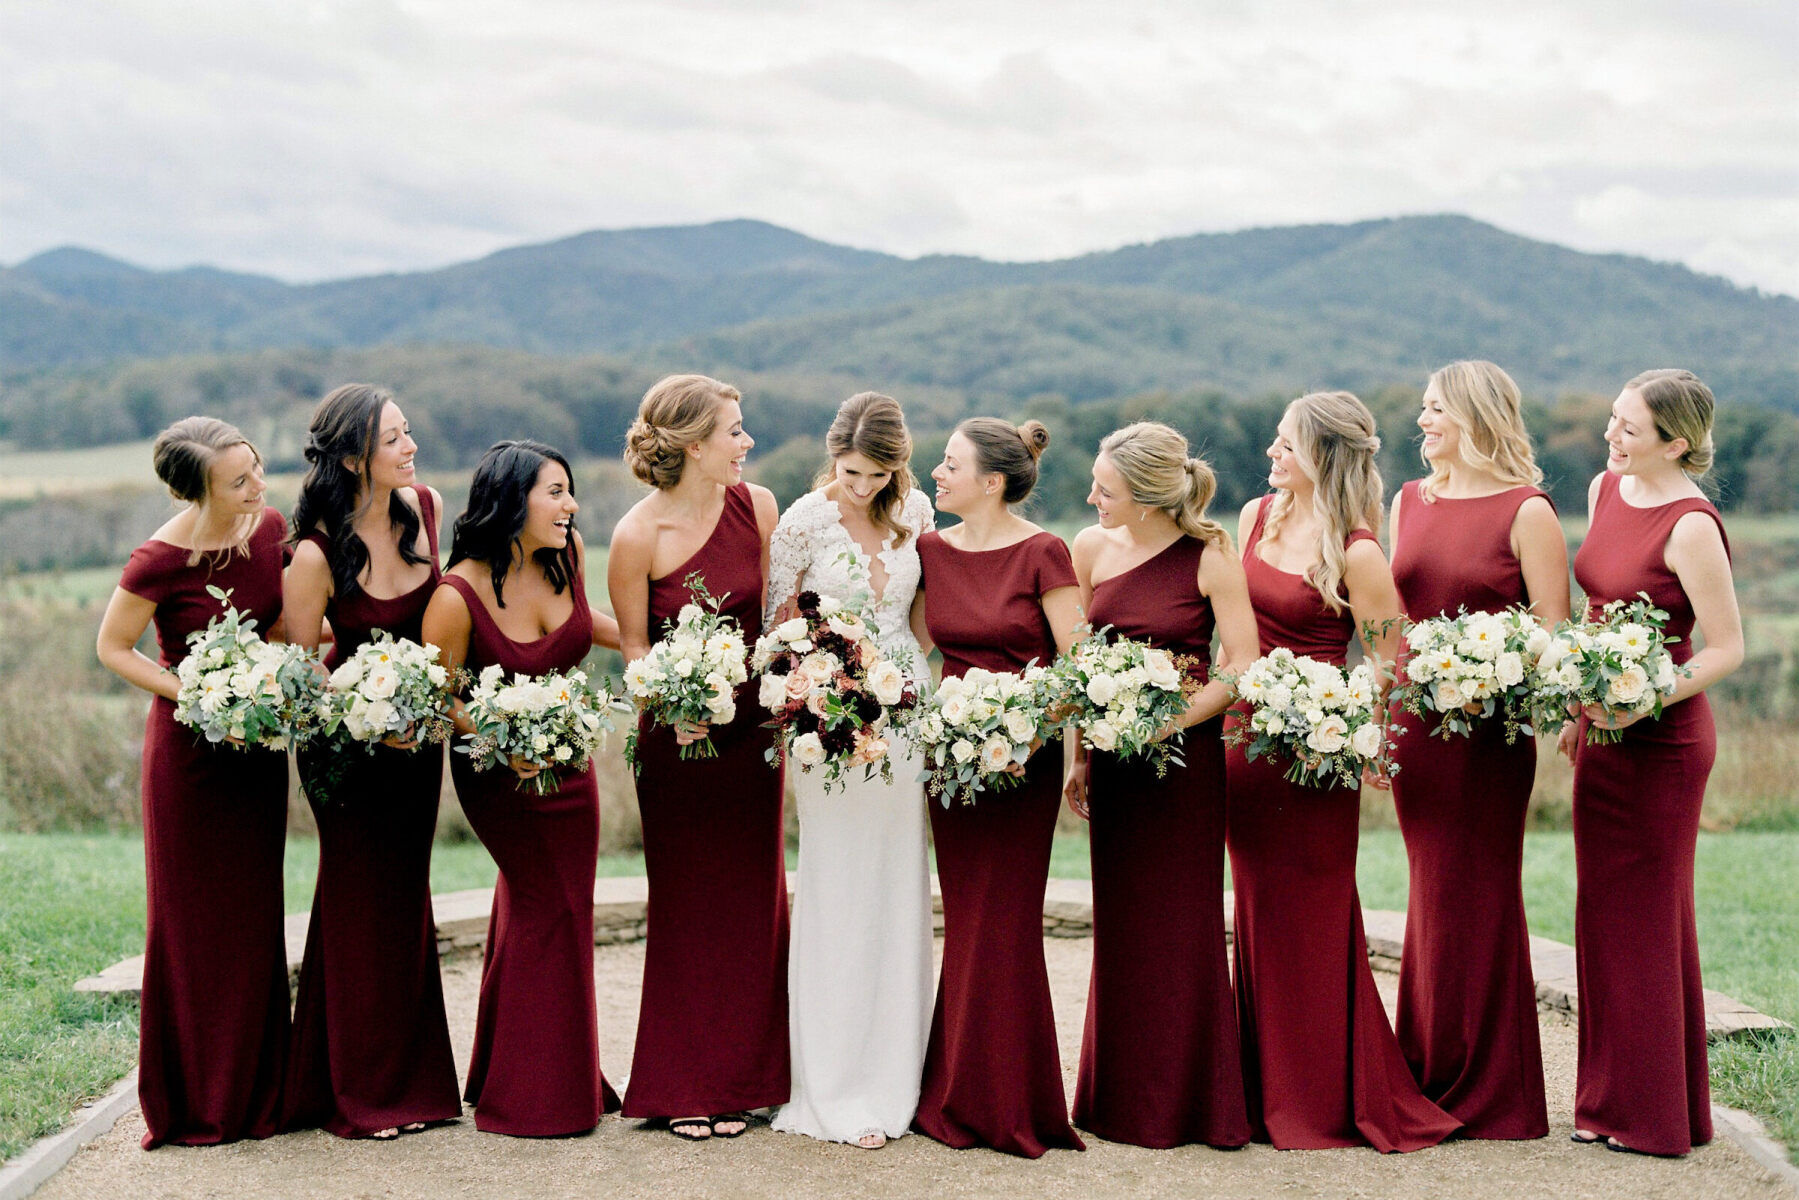 Bride and bridesmaids in front of a mountain setting